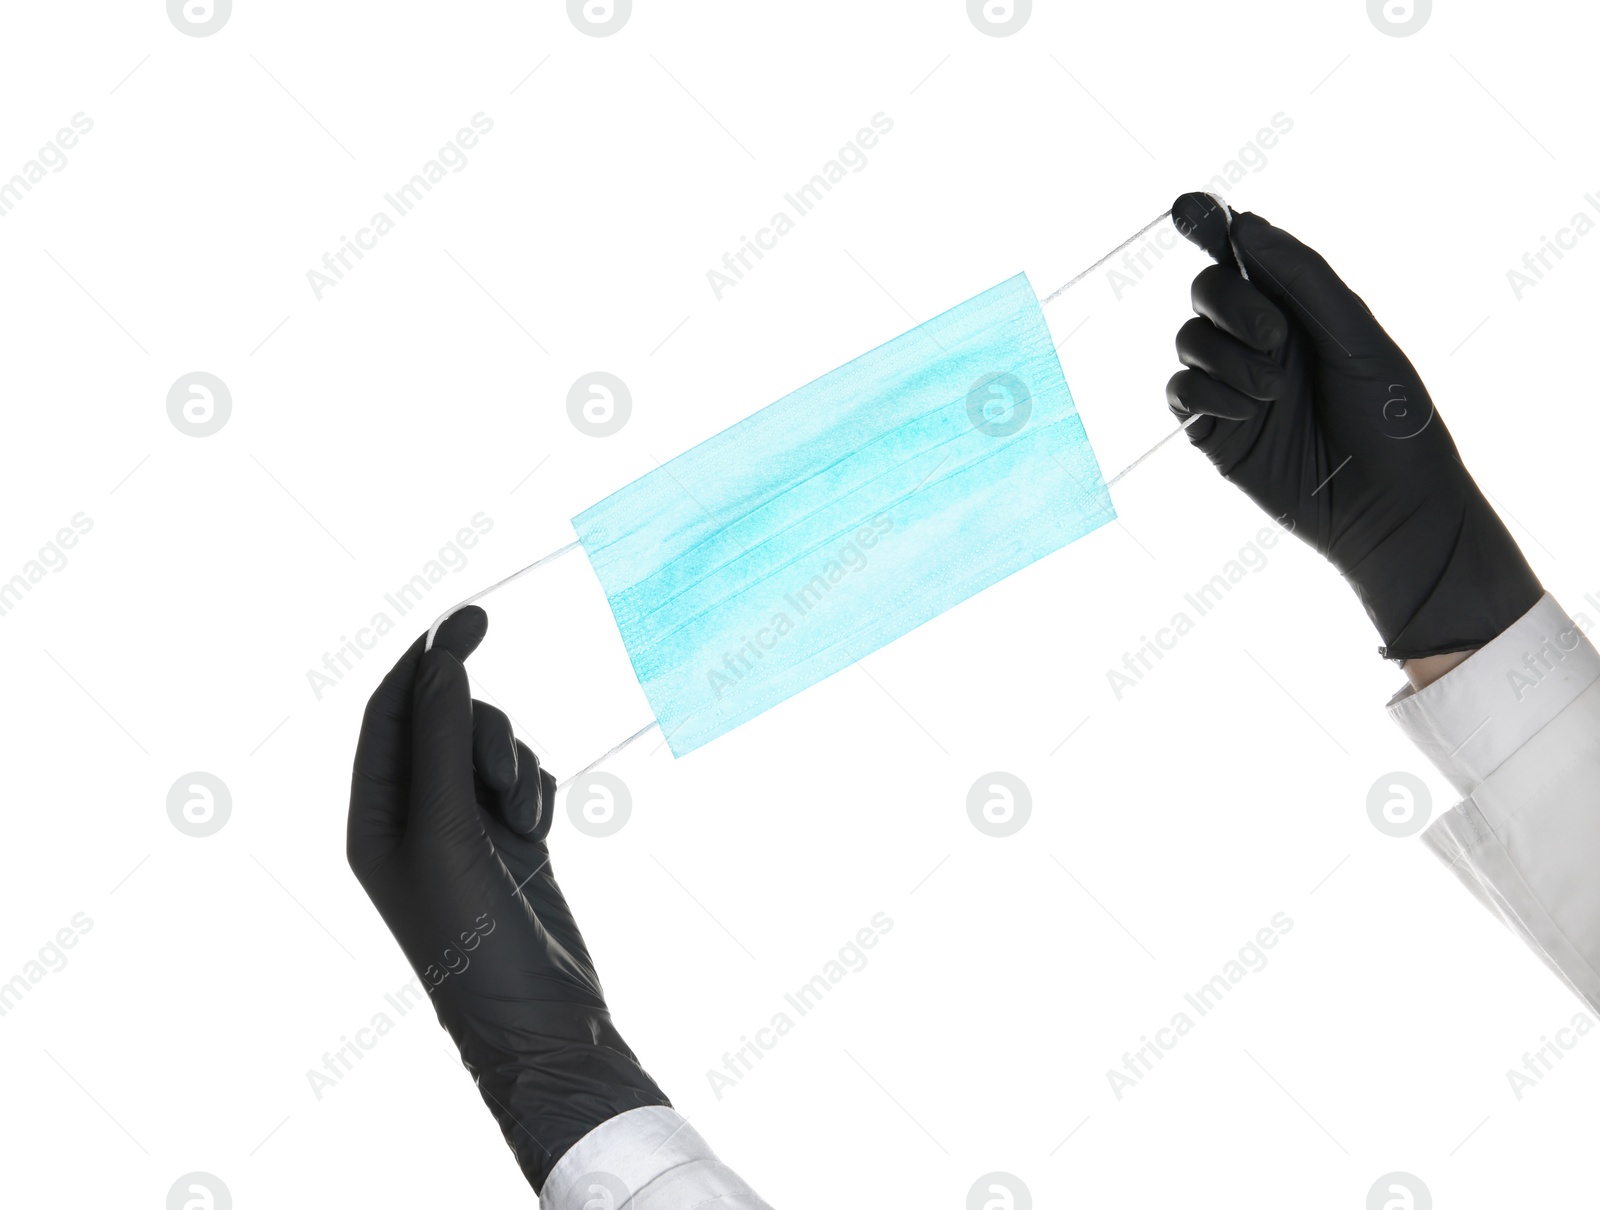 Photo of Doctor in sterile gloves holding medical face mask on white background